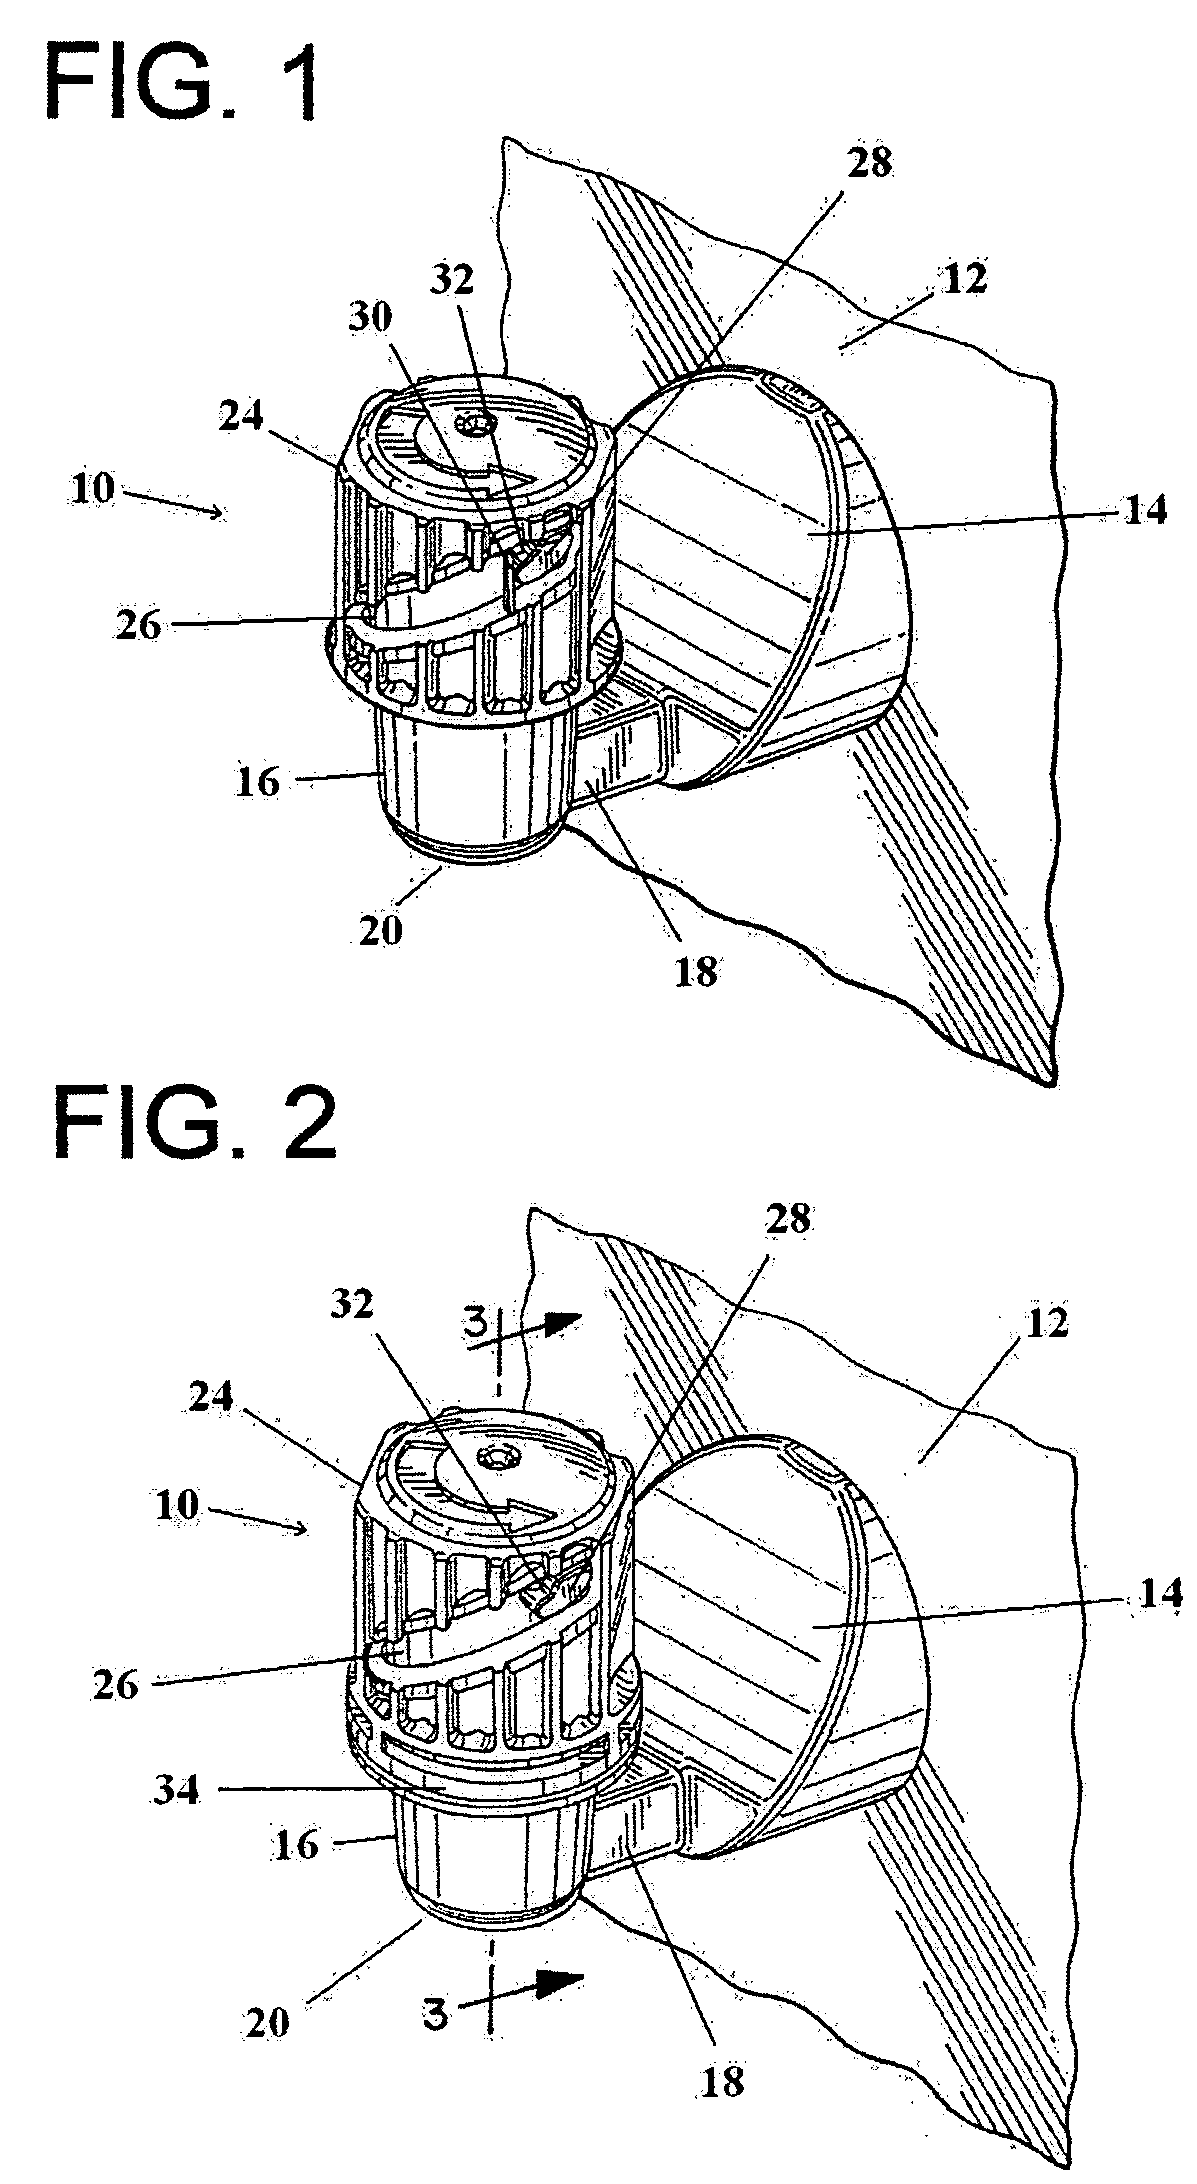 Valve for controlling the flow of fluids